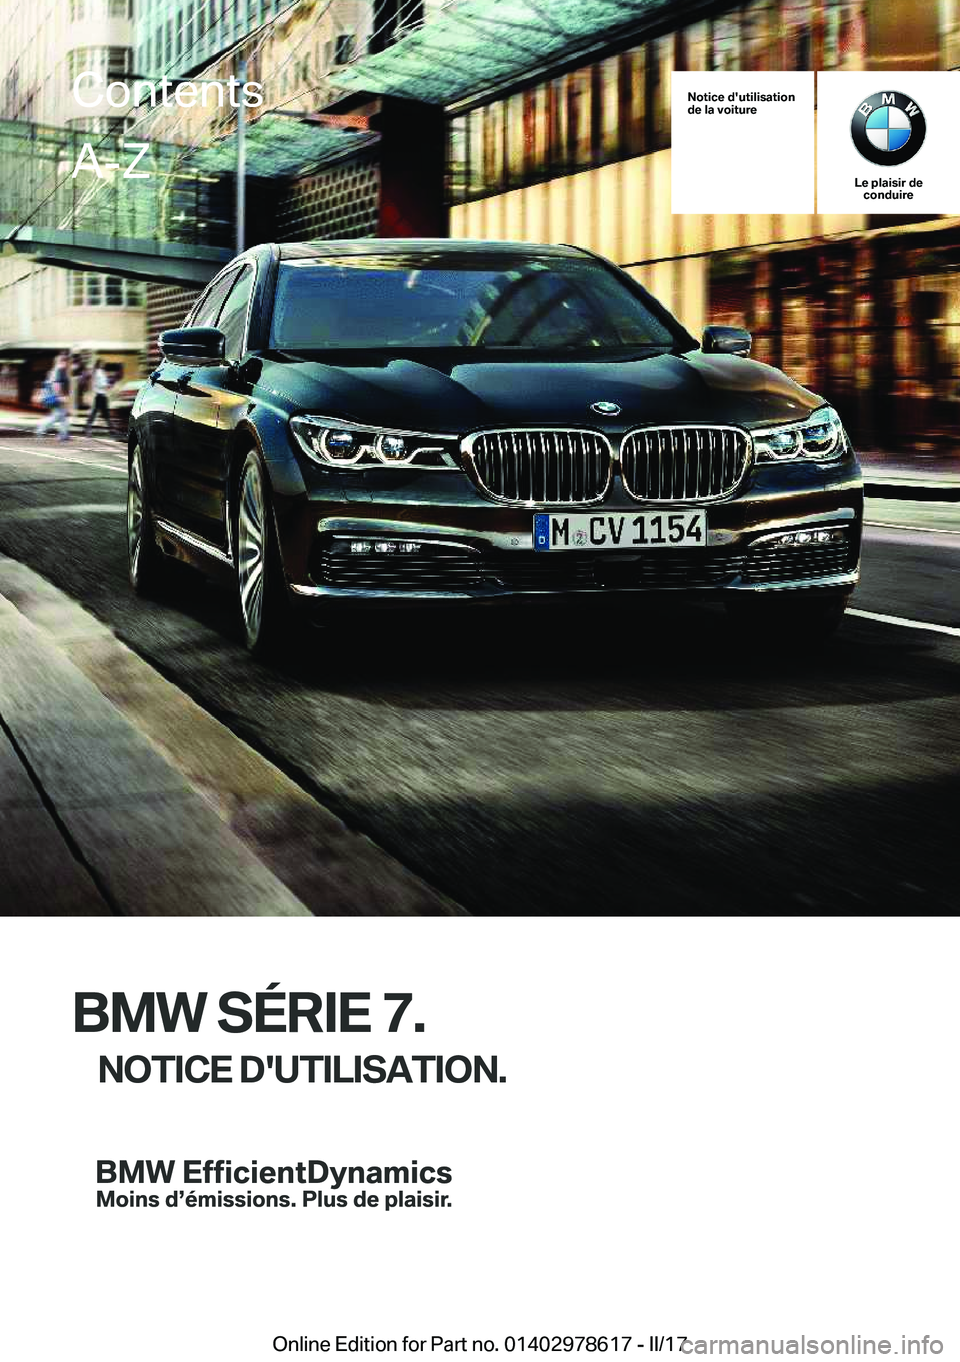 BMW 7 SERIES 2018  Notices Demploi (in French) �N�o�t�i�c�e��d�'�u�t�i�l�i�s�a�t�i�o�n
�d�e��l�a��v�o�i�t�u�r�e
�L�e��p�l�a�i�s�i�r��d�e �c�o�n�d�u�i�r�e
�B�M�W��S�